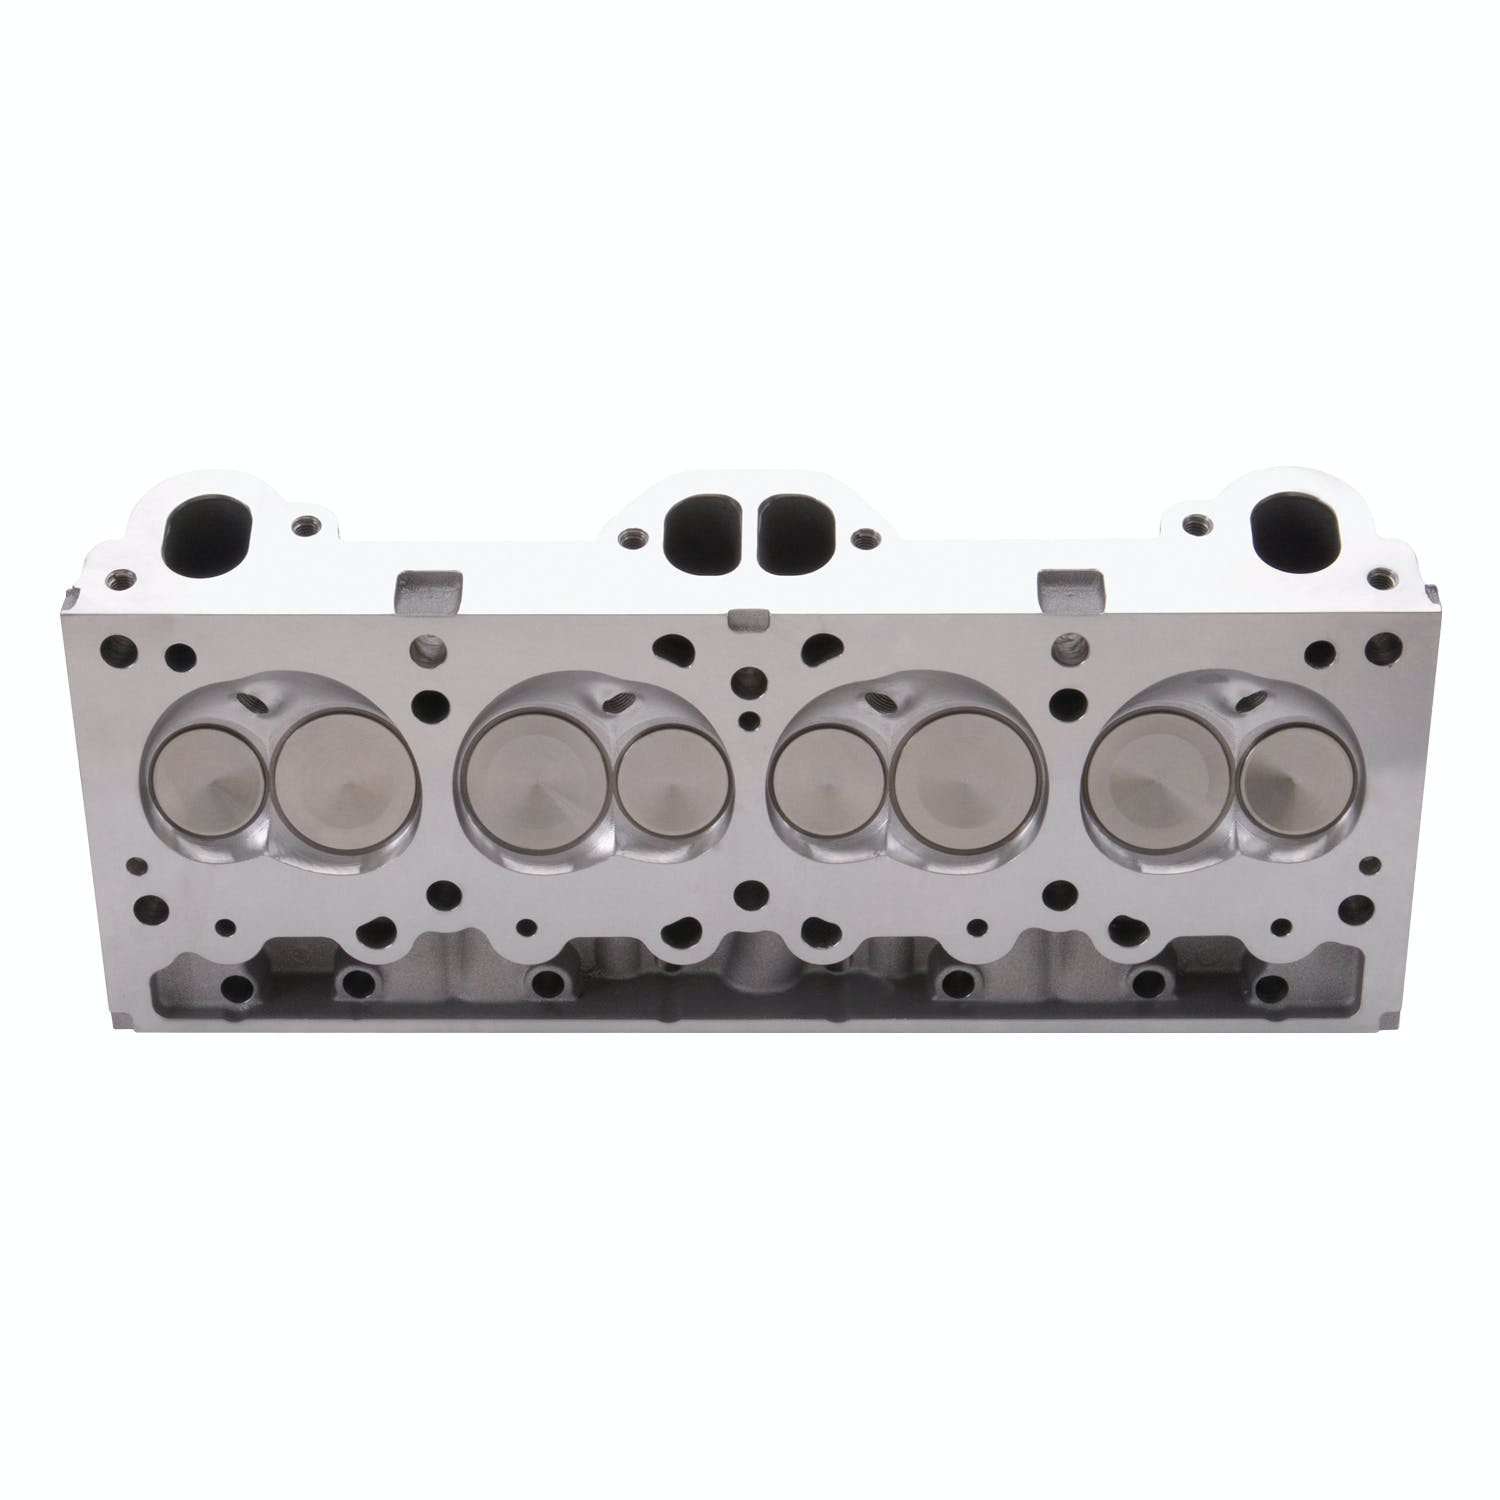 Edelbrock 61579 CYL HEAD PERF CNC D-PORT FOR PONTIAC ENGINES 87CC CHAMBERS SINGLE COMPLETE